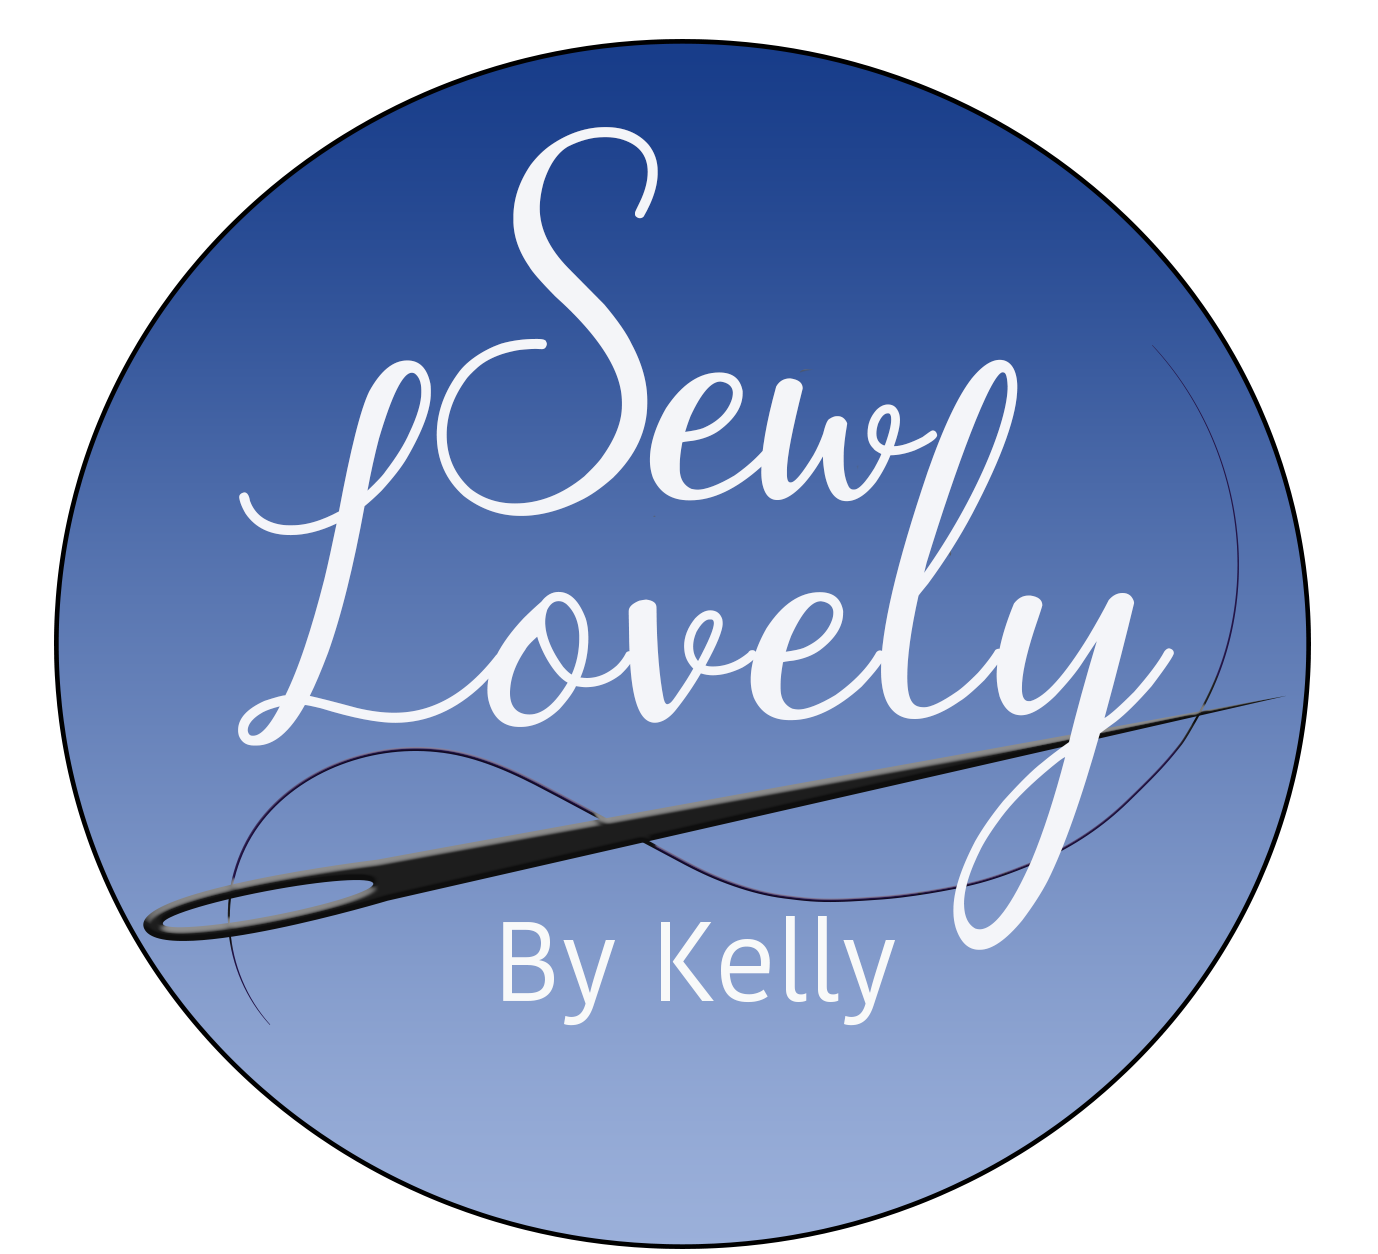 Sew Lovely By Kelly